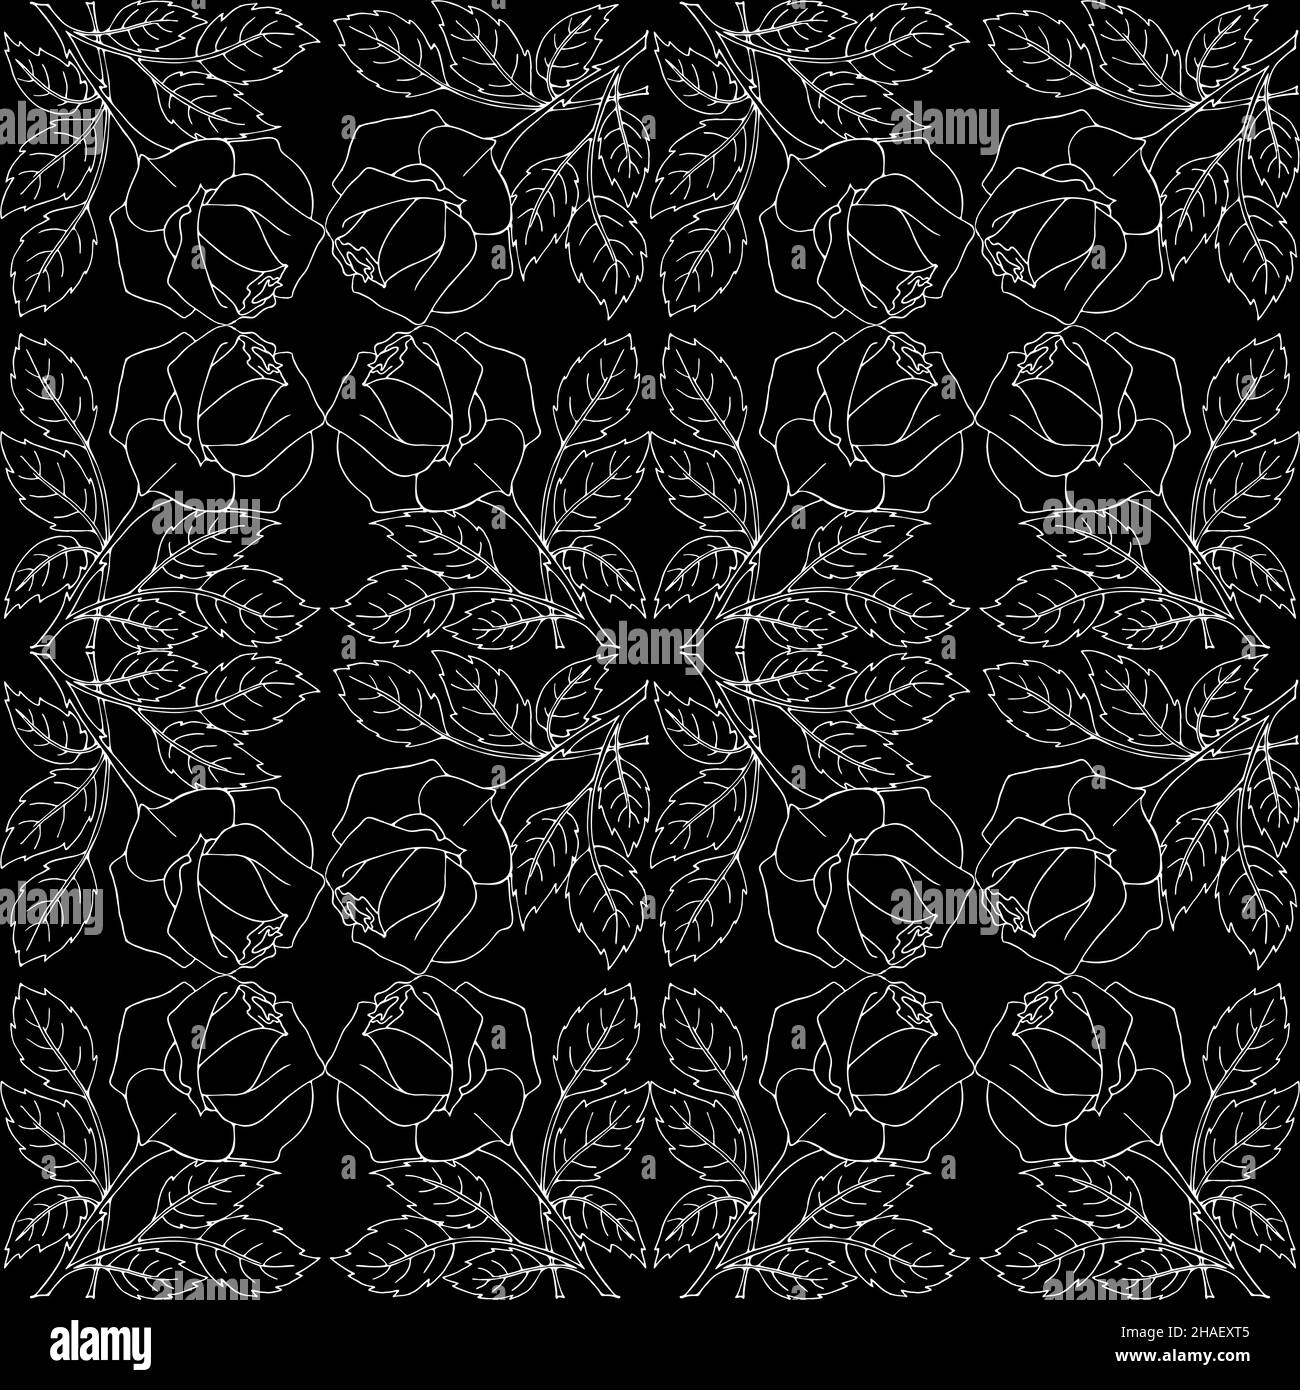 endless white floral pattern on black background Stock Photo